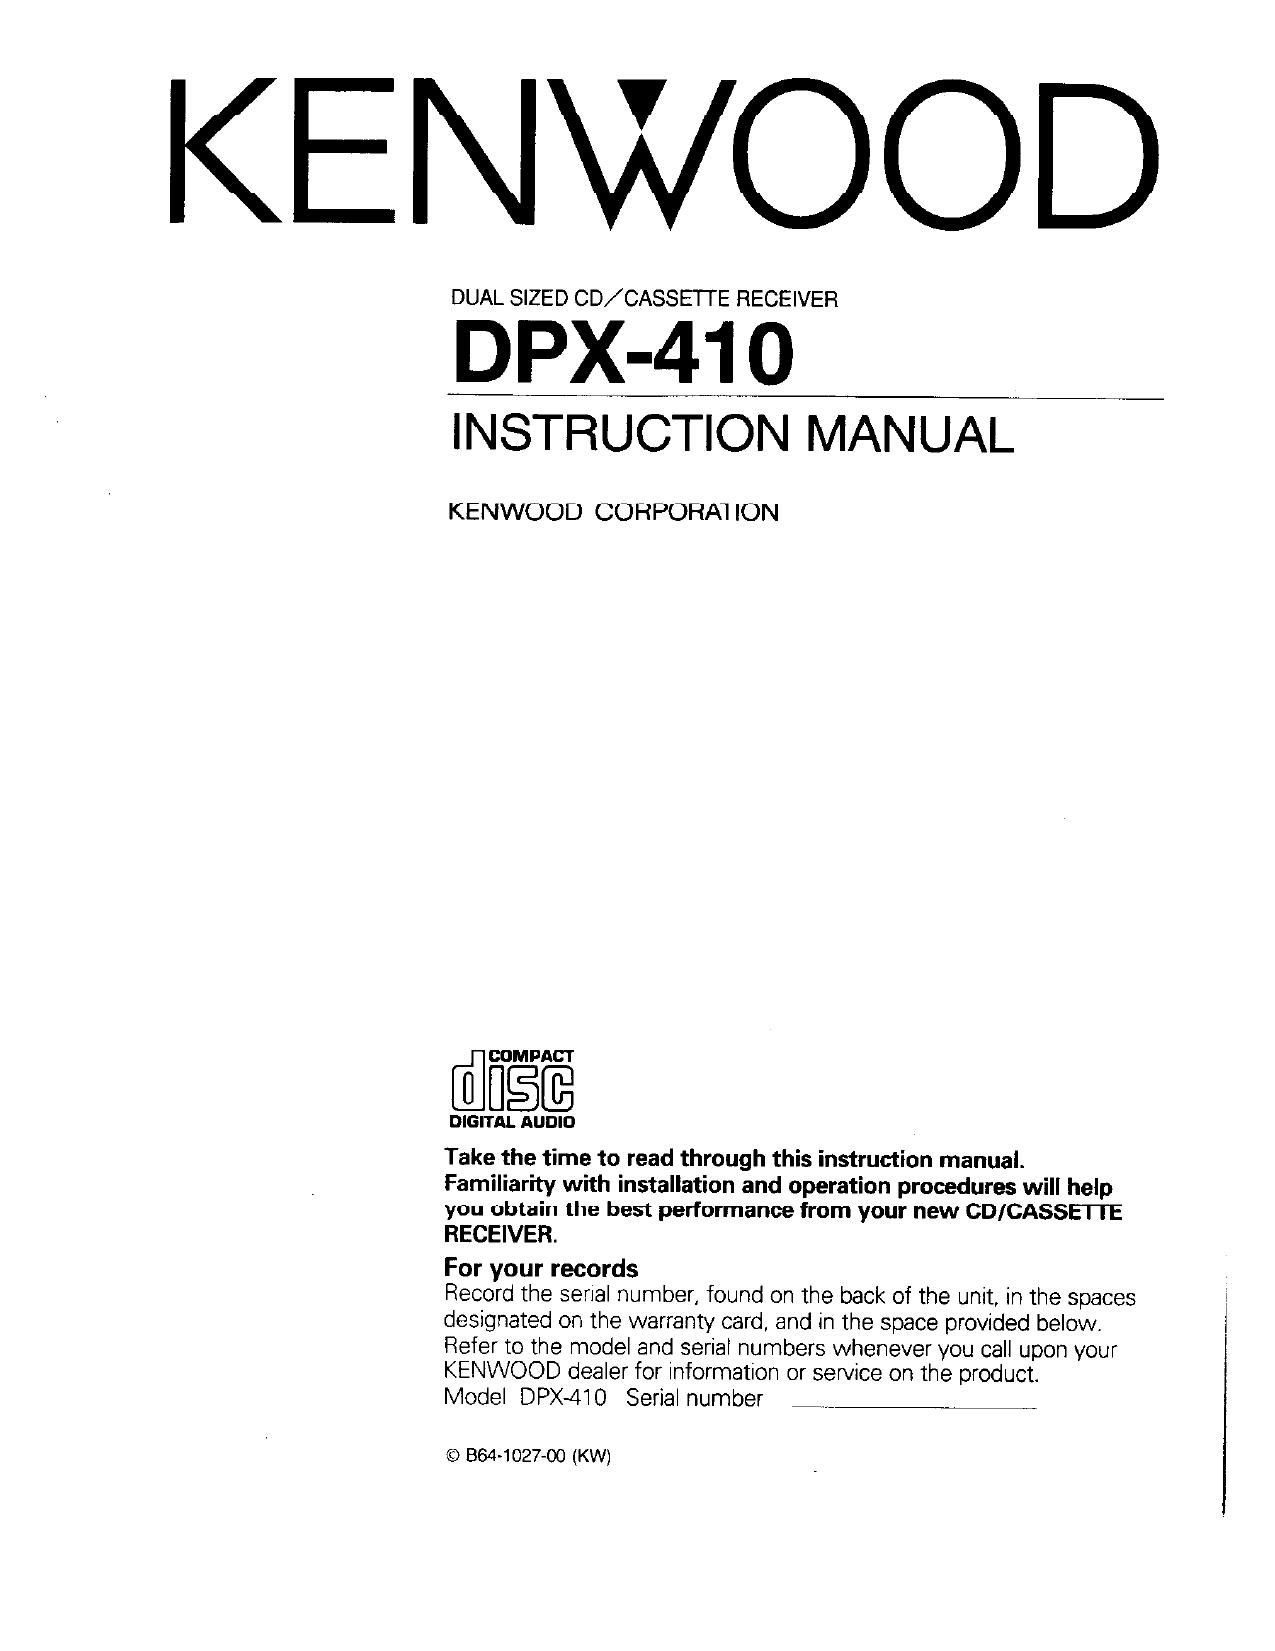 Kenwood DPX 410 Owners Manual